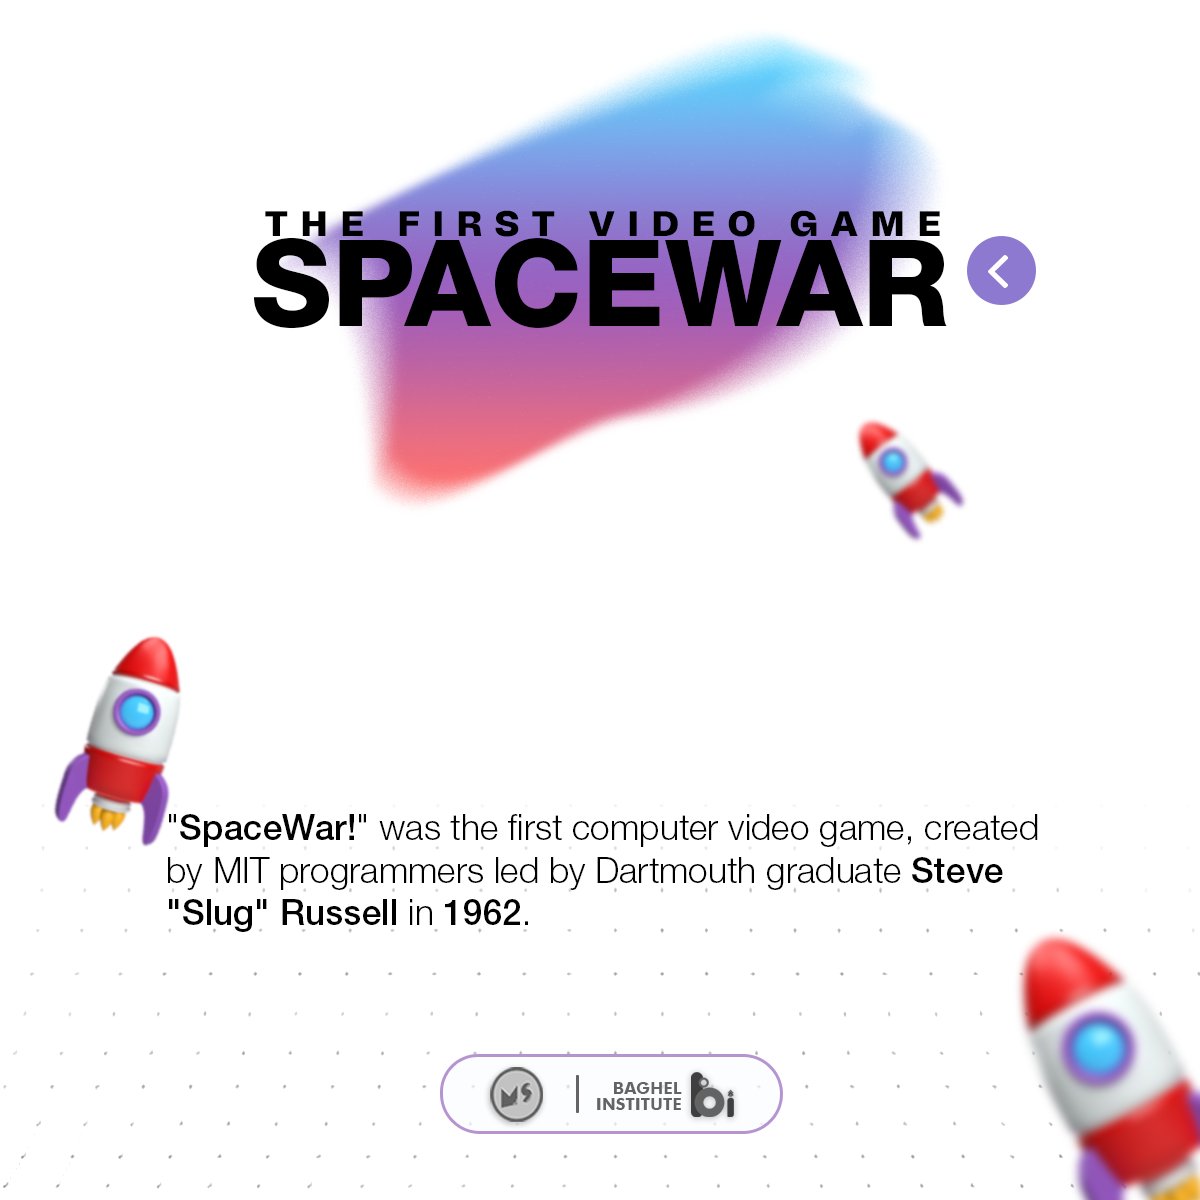 'Spacewar!' The first computer video game launched in 1962 !!!! 
#computergame #computergames #computer #computerengineering #FactOfTheDay #TriviaTime #AmazingFacts #EducateYourself #InterestingFacts #Facts #study #boostyourknowledge #learn #baghelcomputercentre #miniatureschool